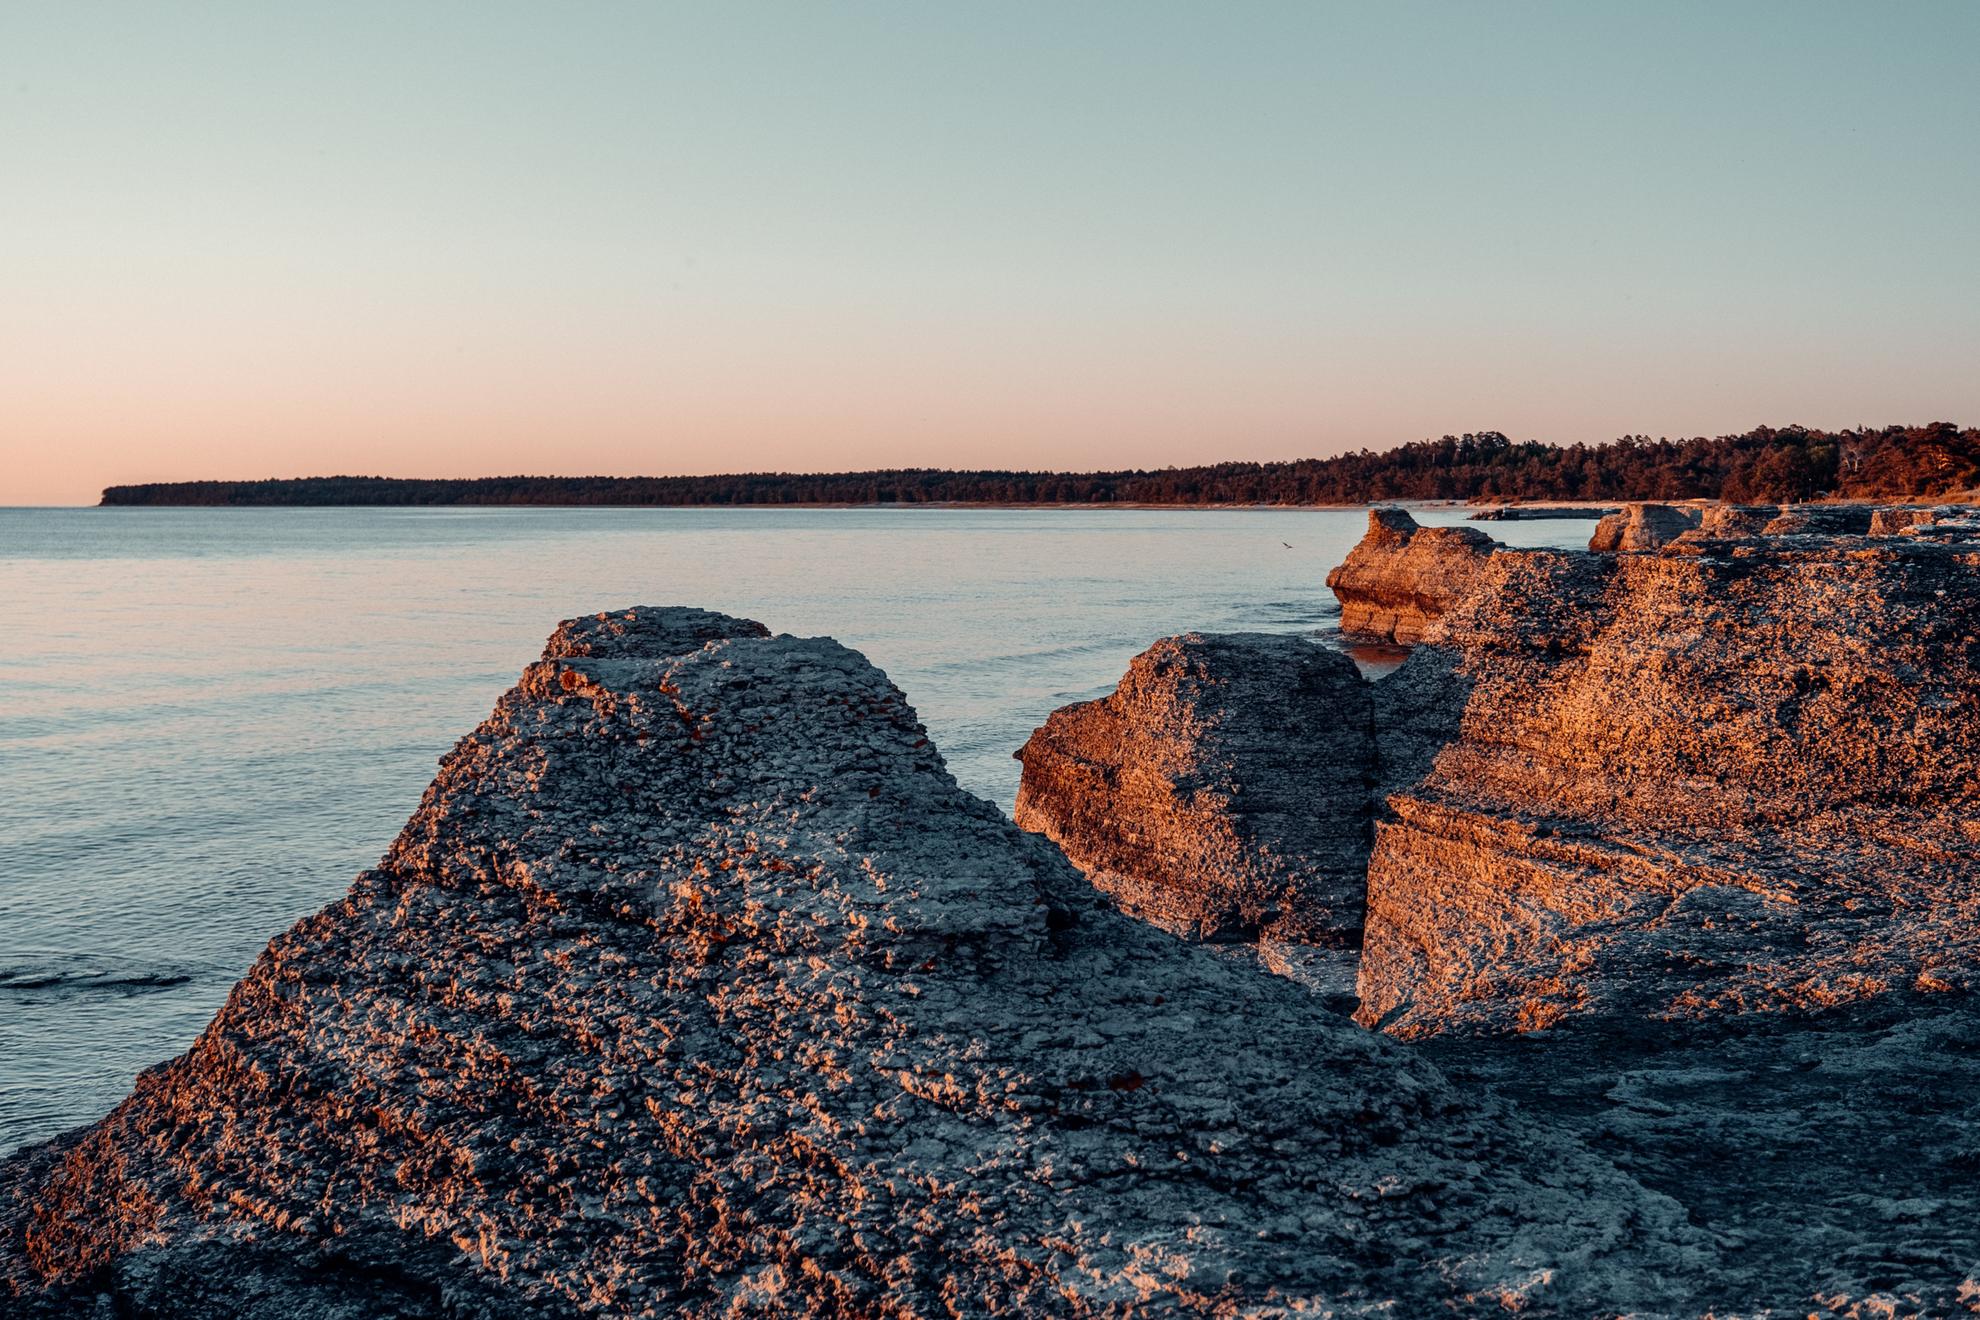 Sunset over rauk formations next to the sea on Öland